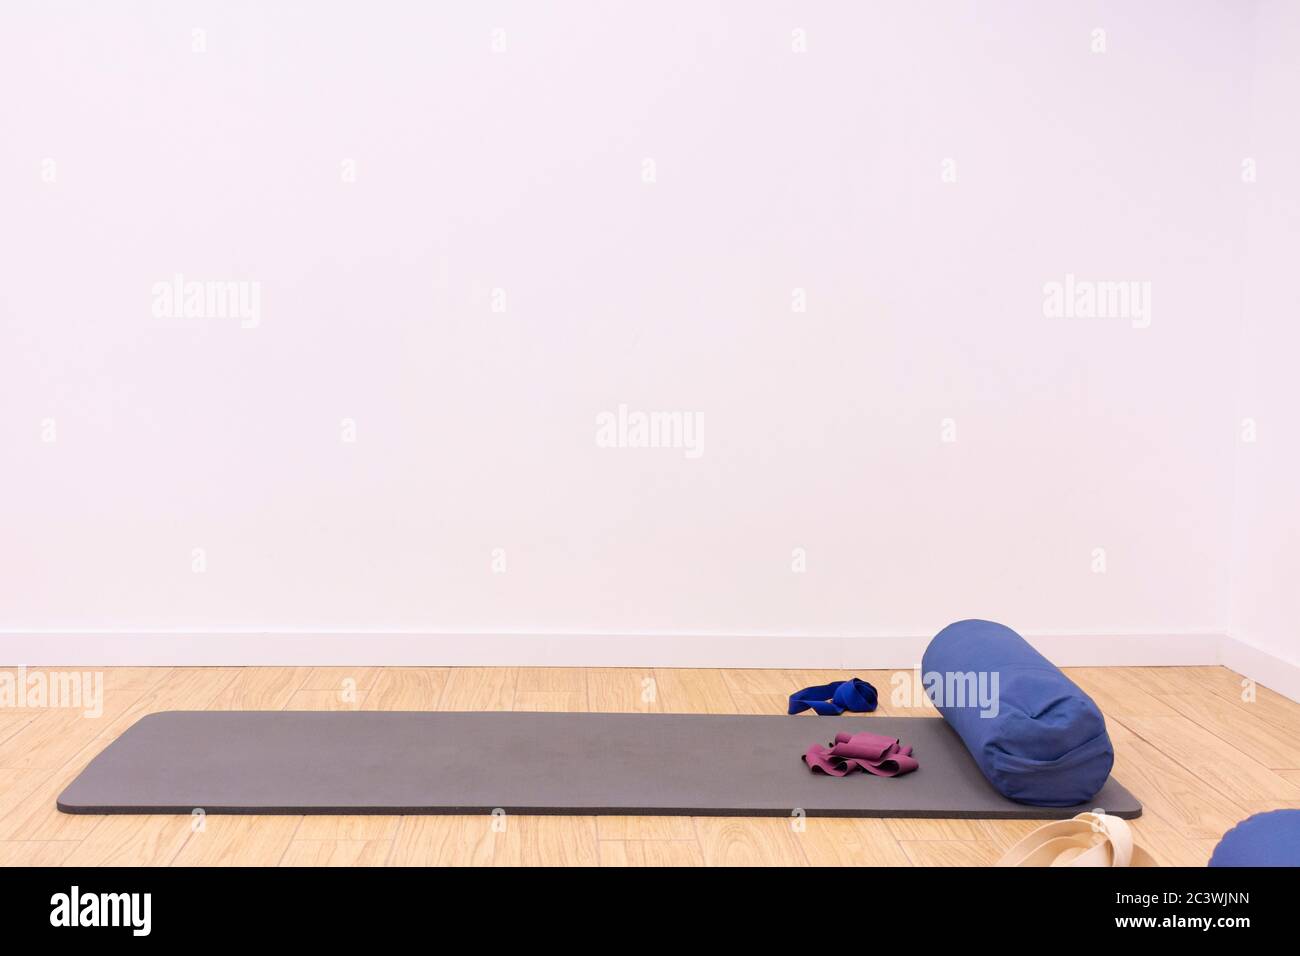 Pilates, exercise or yoga mat with a cushion, an elastic band and a belt, on the floor of a home or gym next to a white wall, with copy space Stock Photo